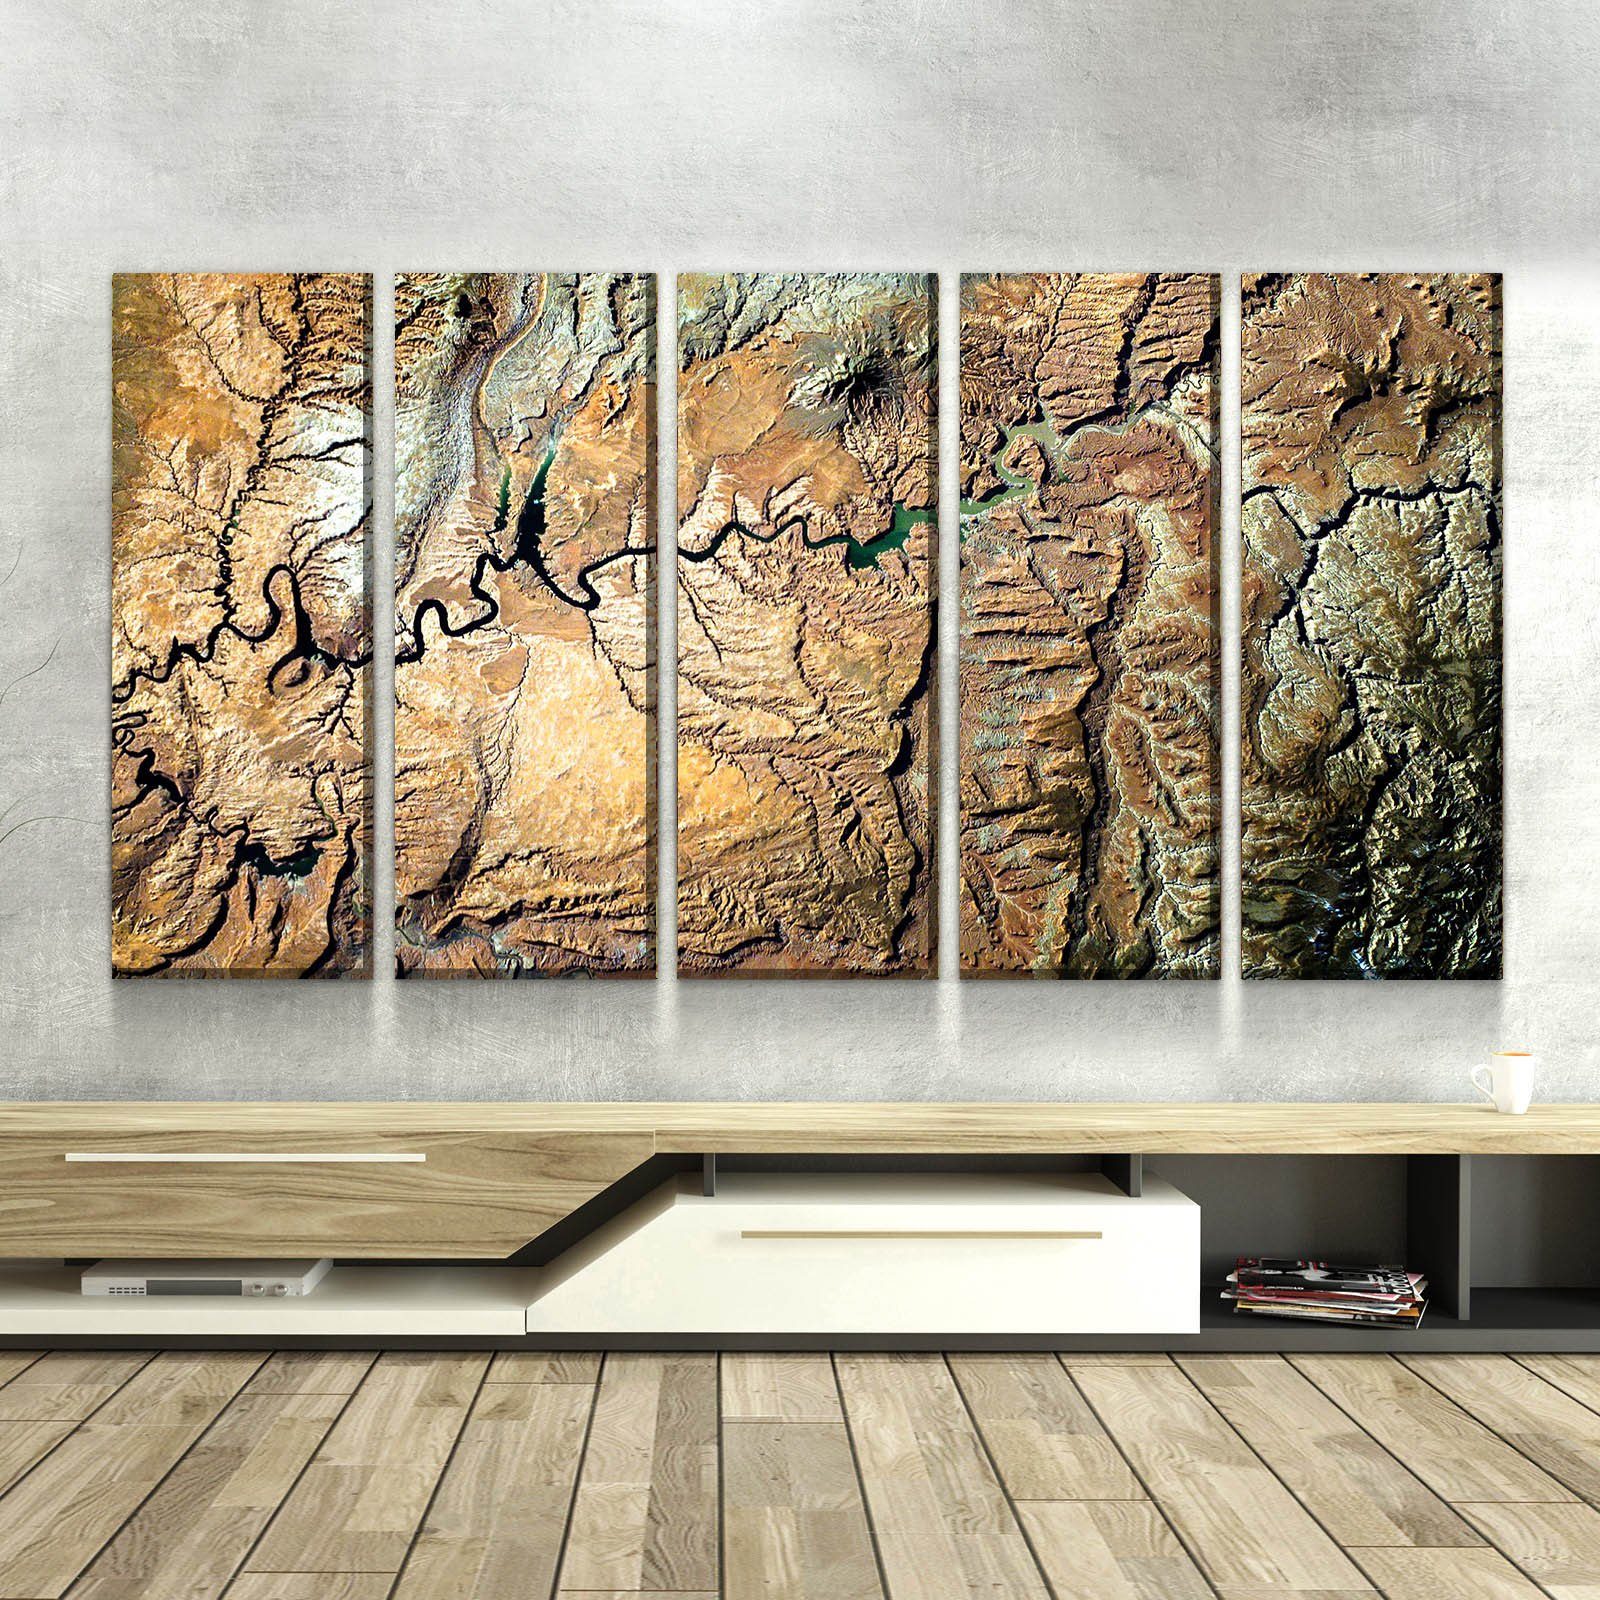 Lake Powell From Space | Ranger Station | Gallery Quality Canvas Wrap - Houseboat Kings